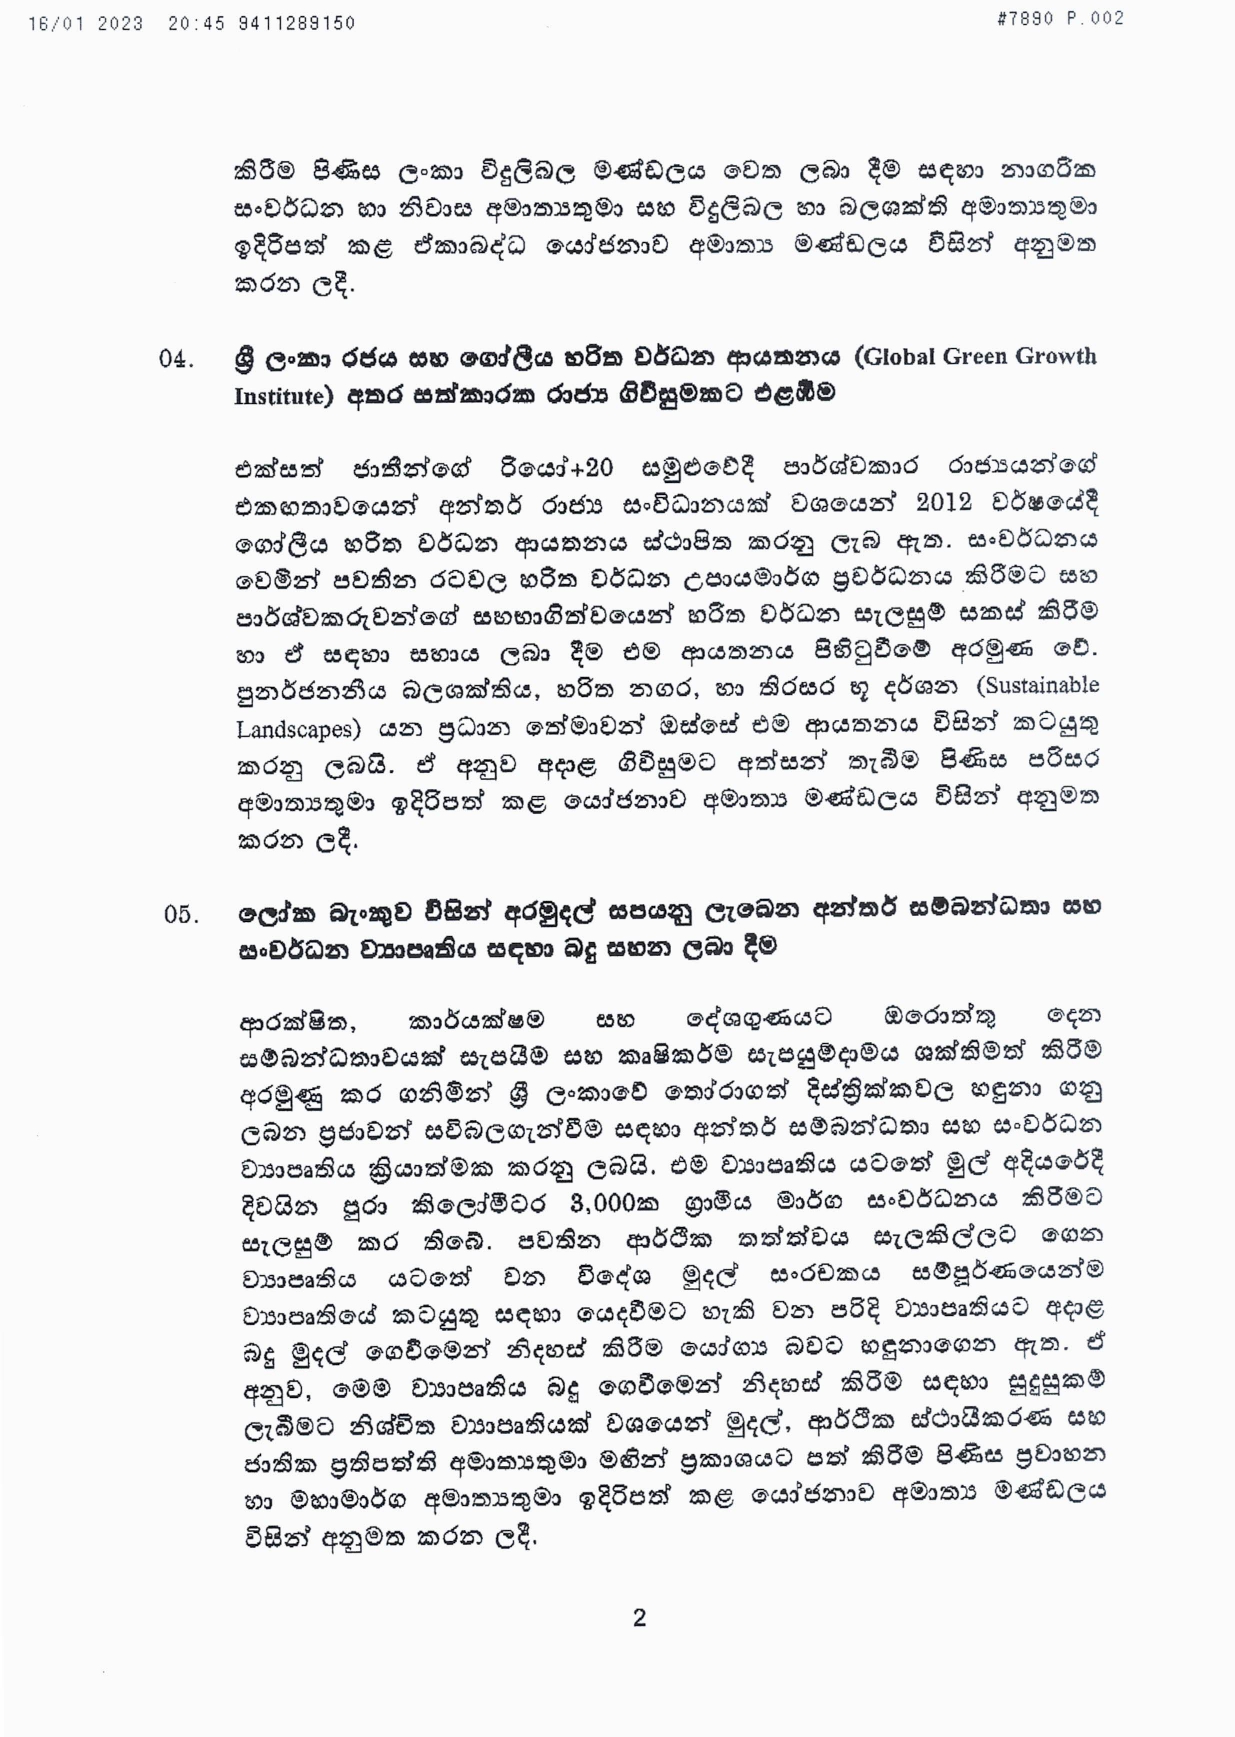 Cabinet Decision on 16.01.2023 page 0002